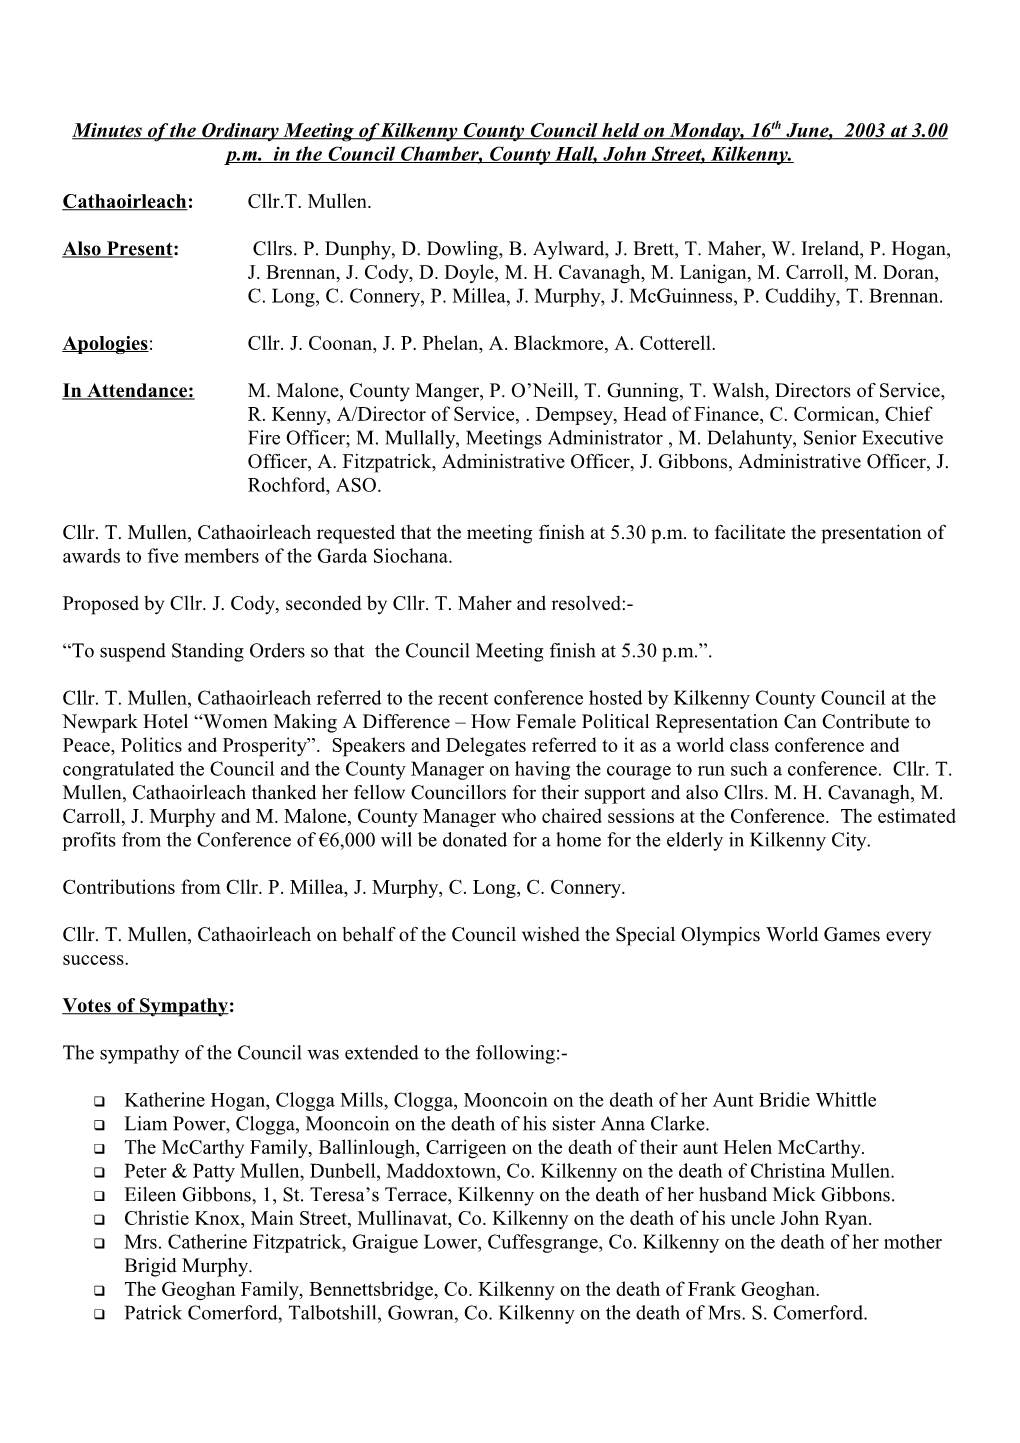 Minutes of the Ordinary Meeting of Kilkenny County Council Held on Monday, 16Th June, 2003 at 3